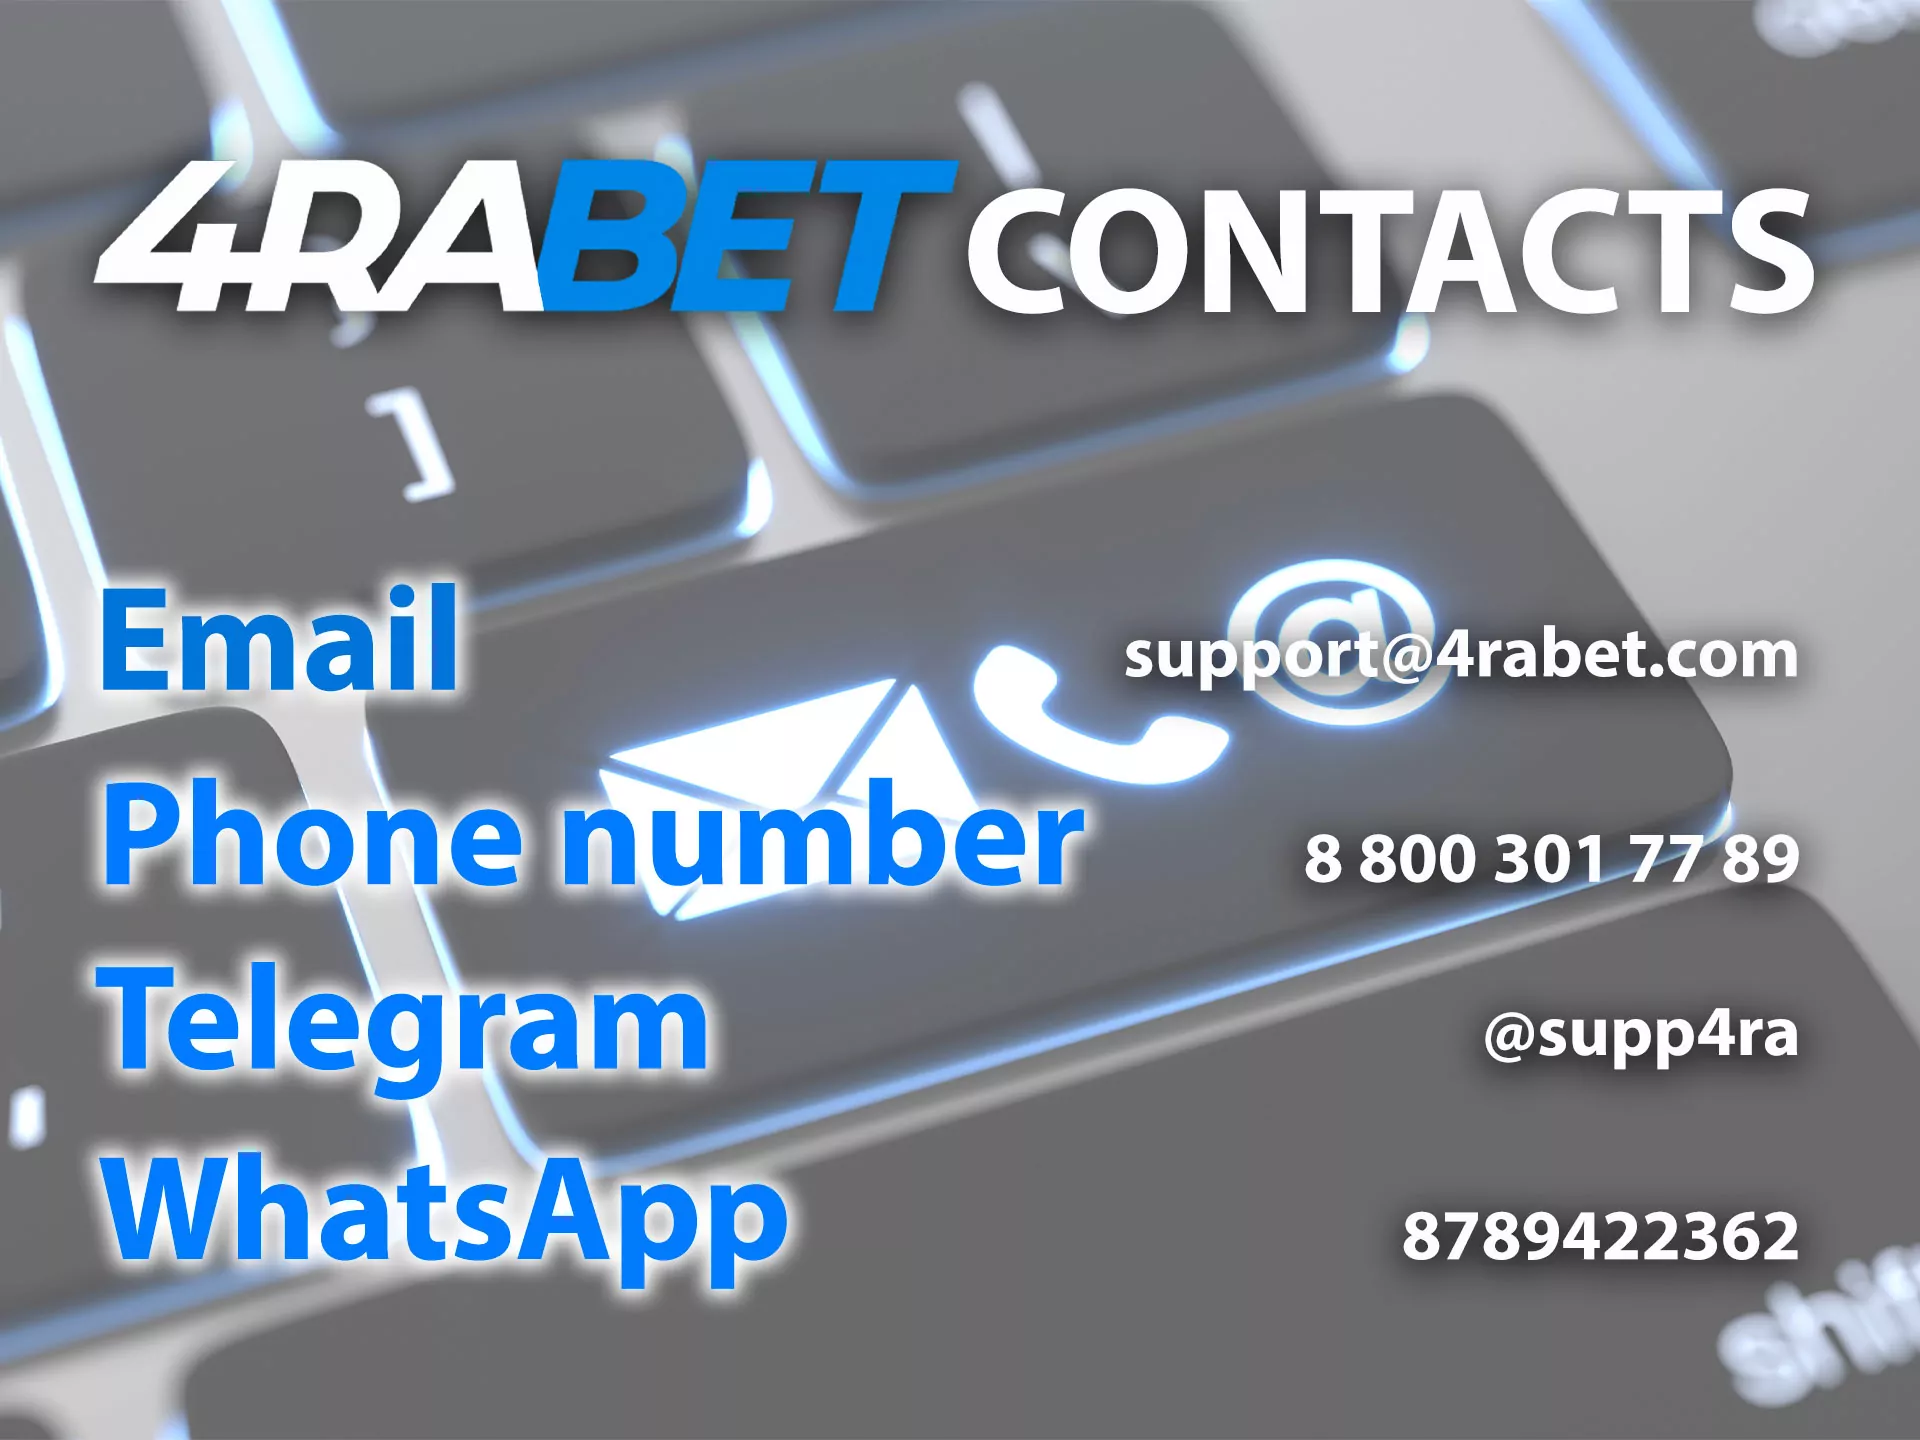 How to contact us? All contacts for contacting 4rabet.